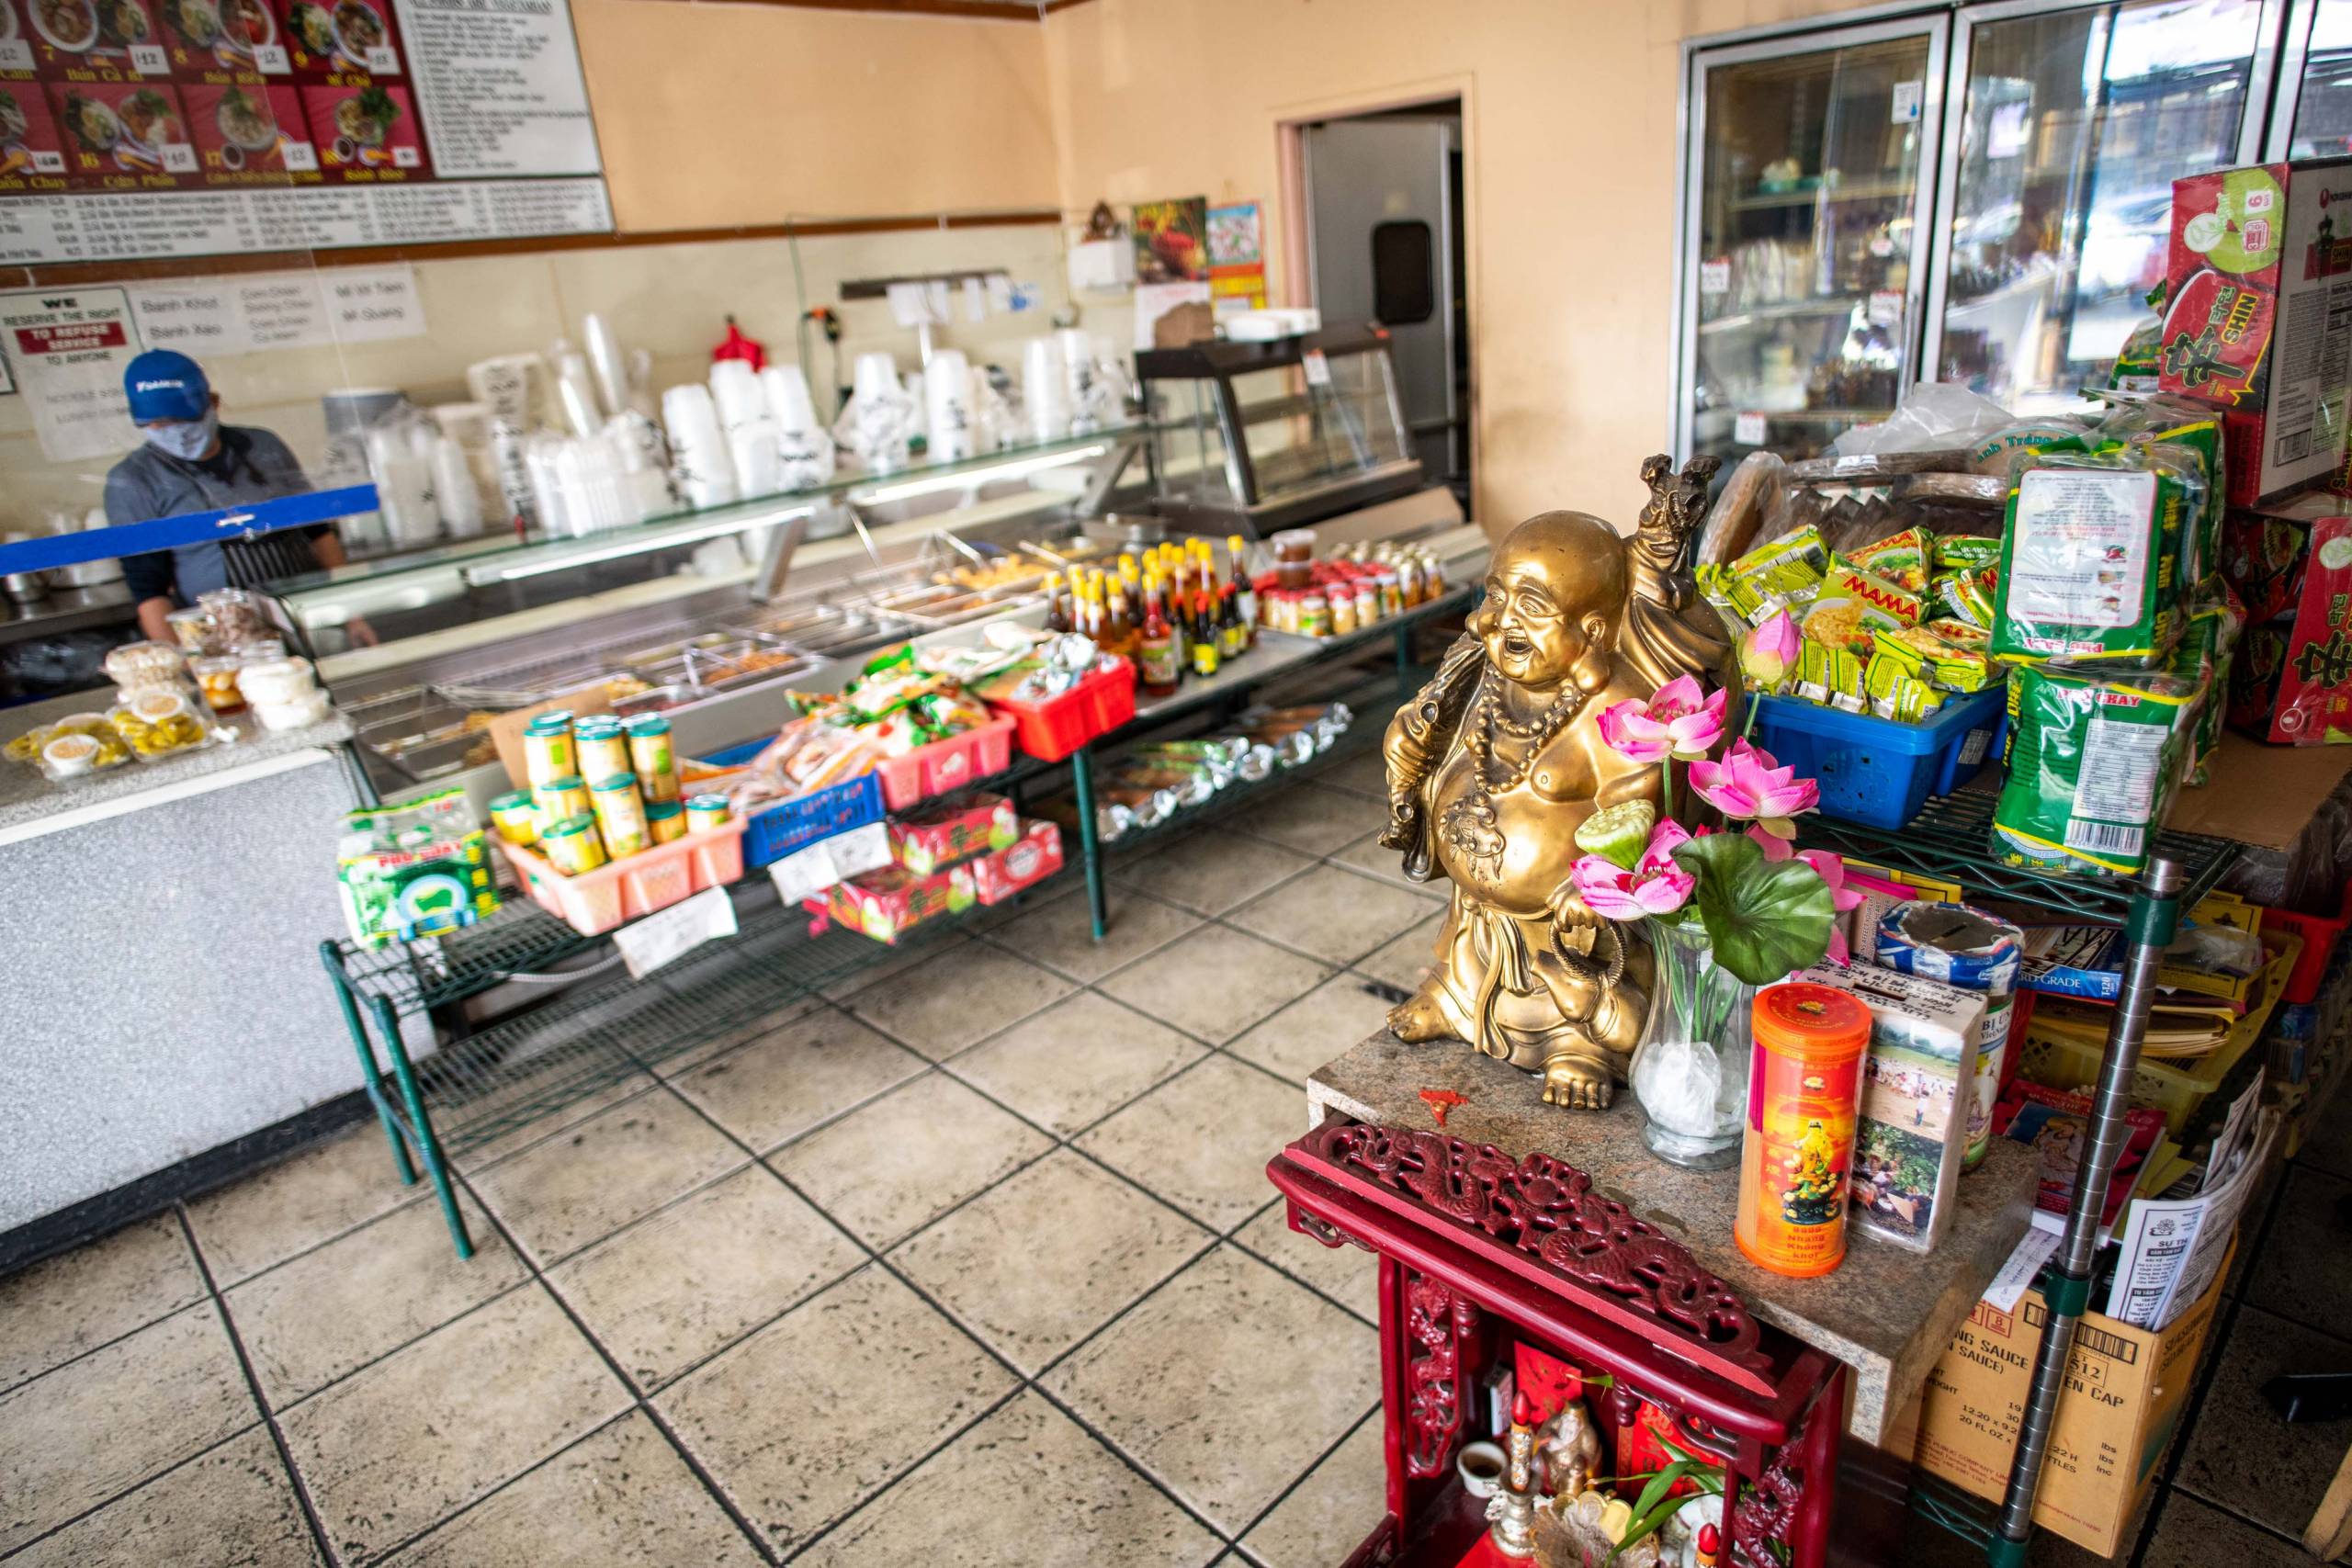 A Buddha statue is displayed prominently inside a Vietnamese deli.